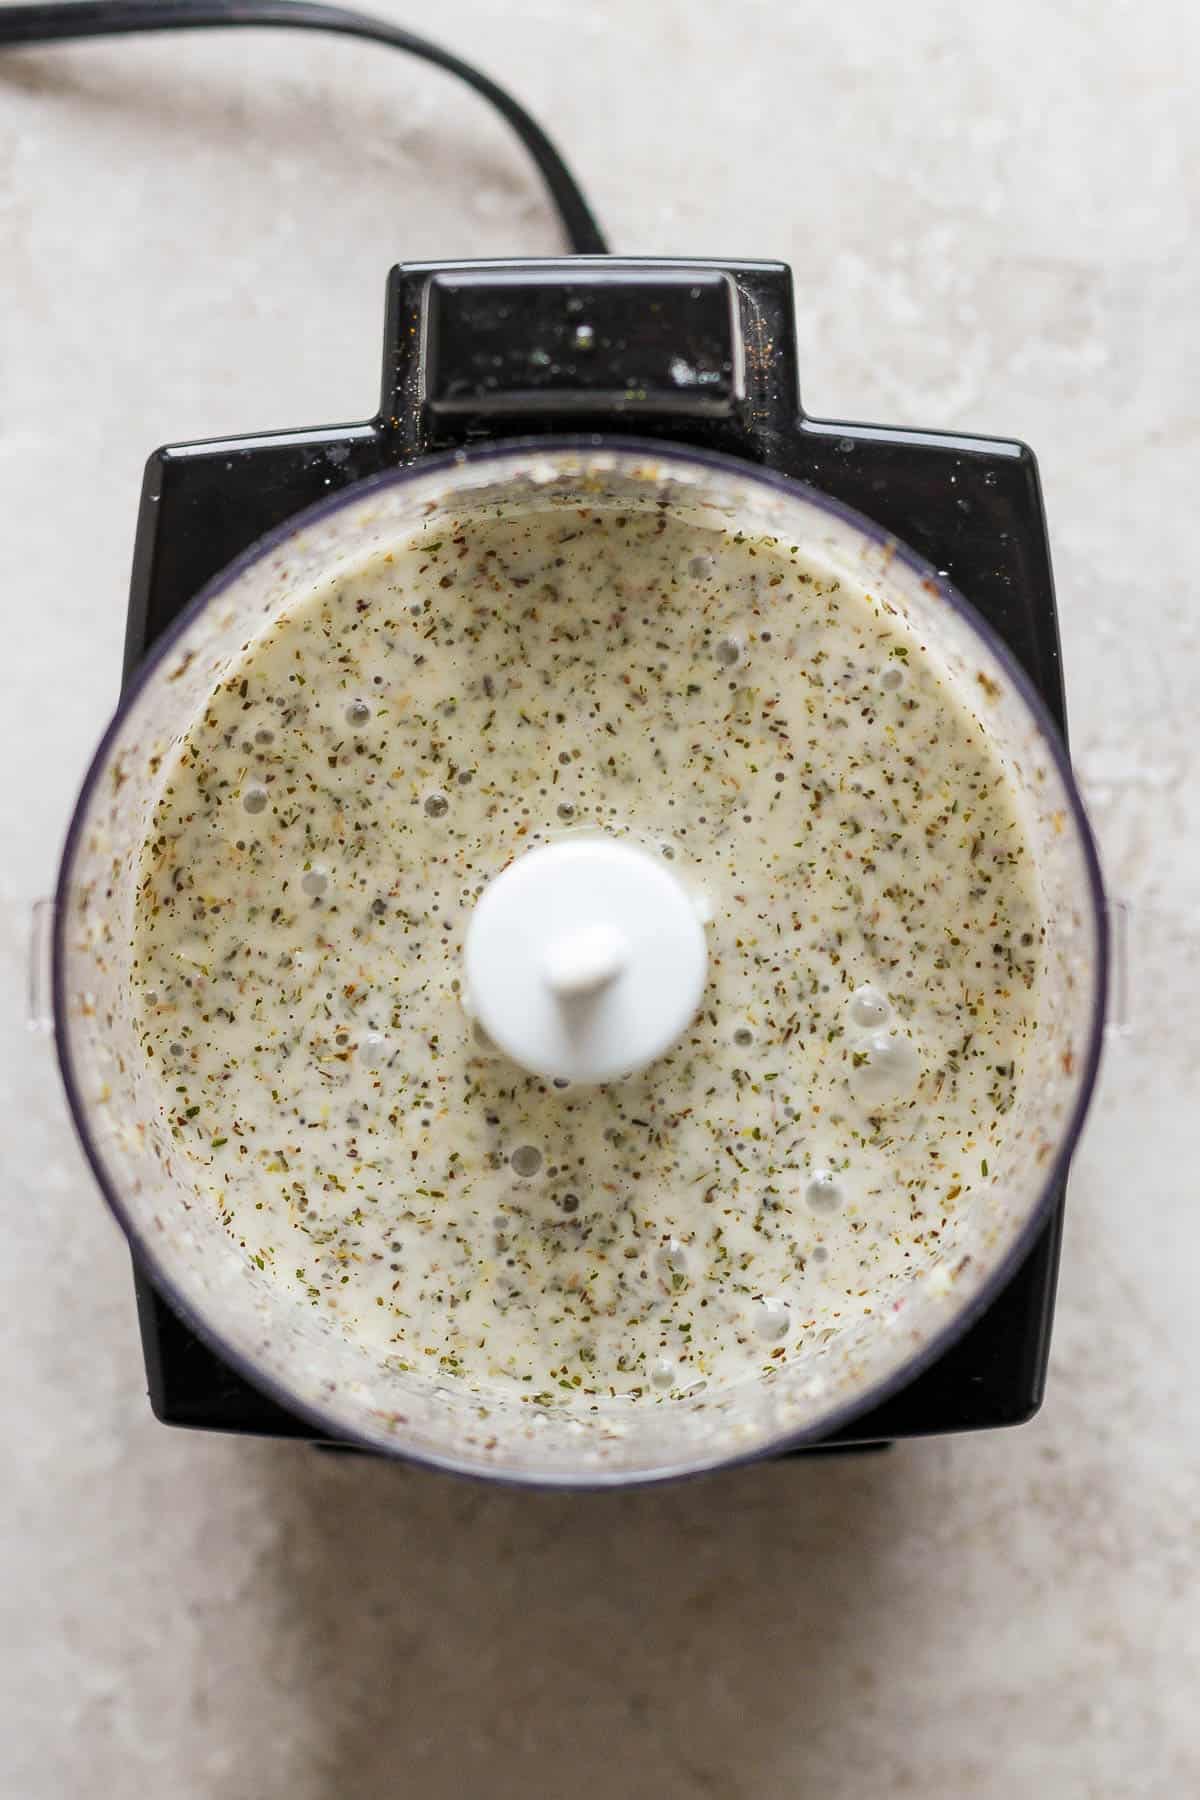 A fully blended Italian dressing in a food processor.